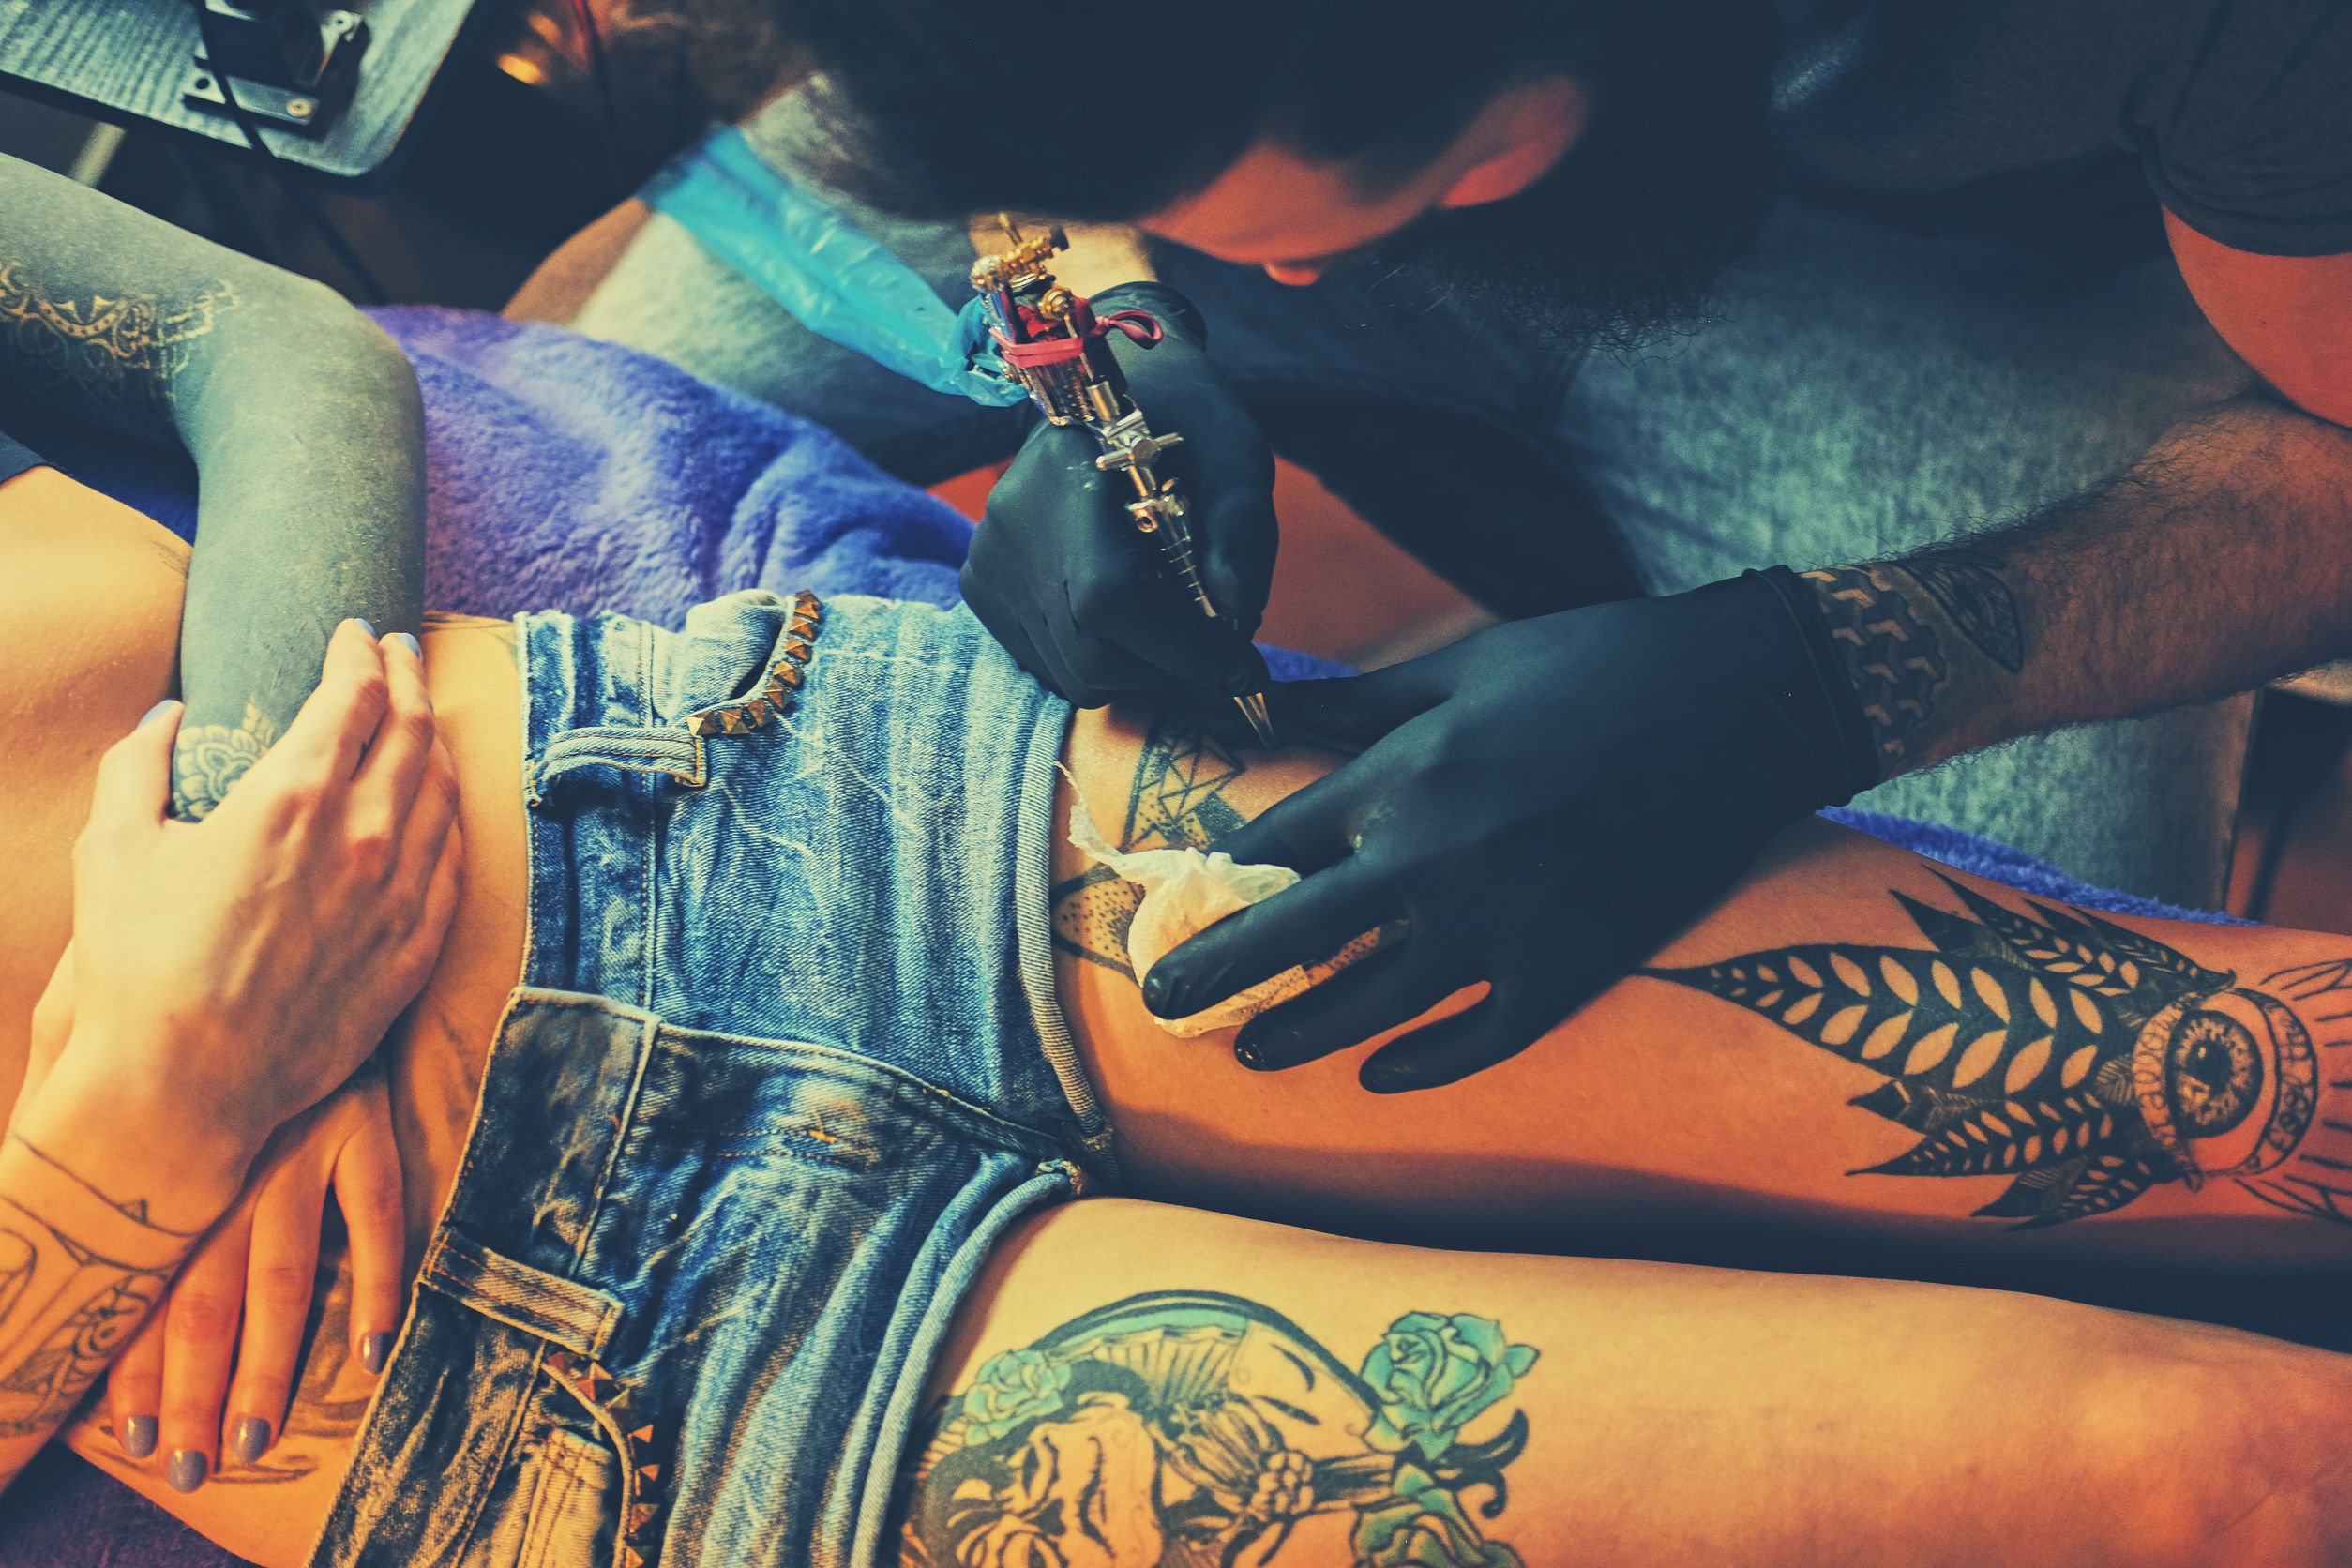 50 Gypsy Tattoos Ideas and Designs to Bring You Fortune this New Year   Tats n Rings